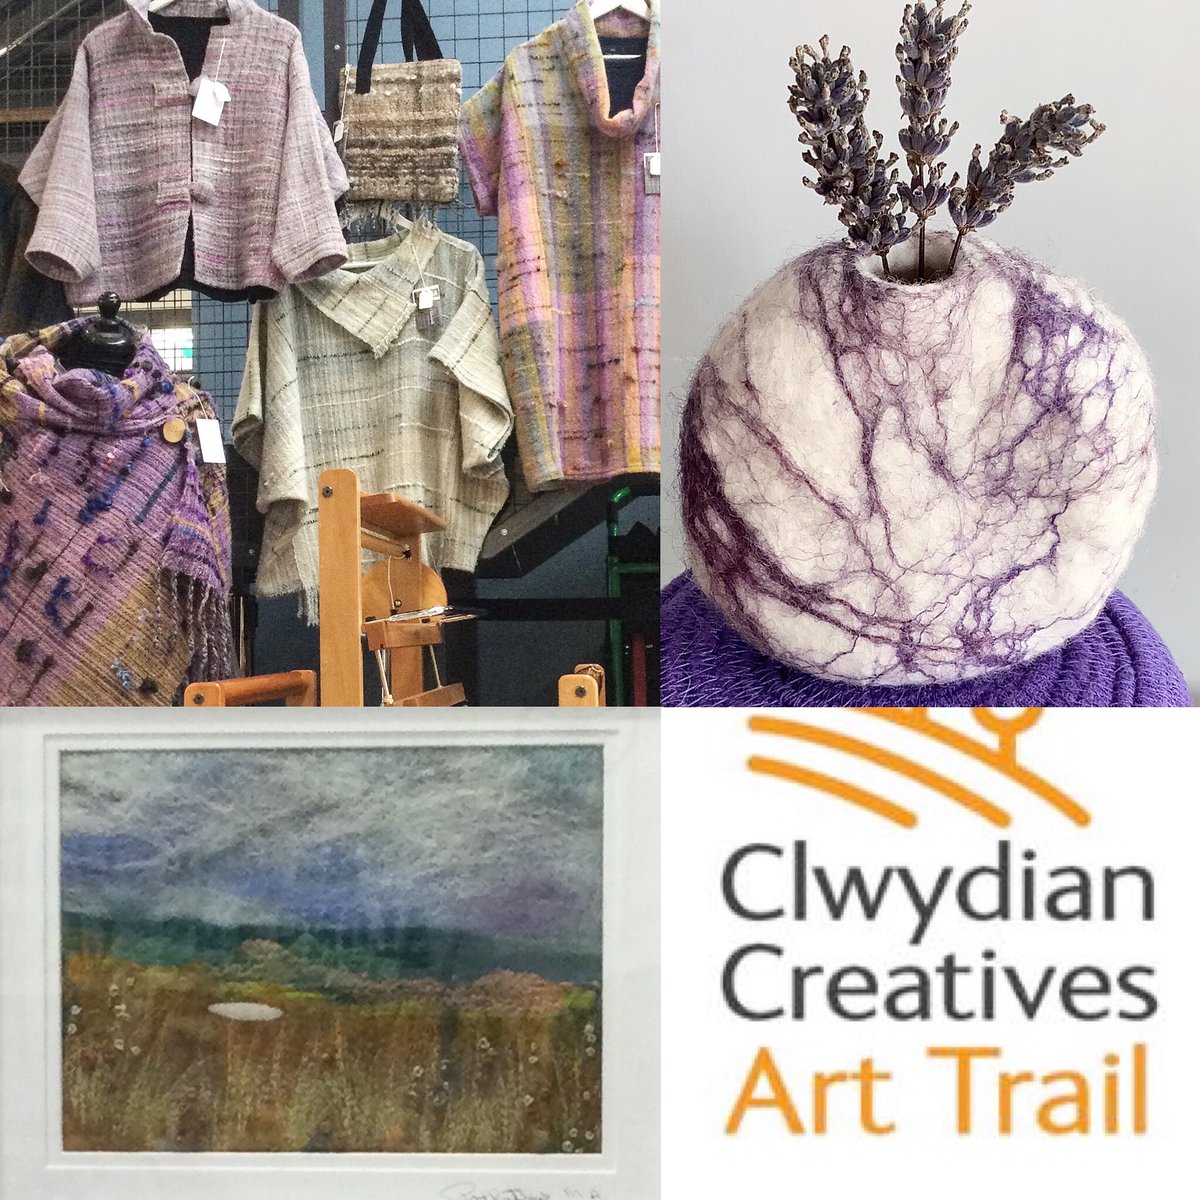 Pedair : Anwen Hughes, Pat Butters and  Cheryl Crichton- Edwards are at Y Shed , Pen y maes , Meliden LL19 8PY Saturday 18 September  10-4pm. We look forward to welcoming you and can definitely recommend the cake!!      #clwydiancreatives #yshedmeliden  #arttrail